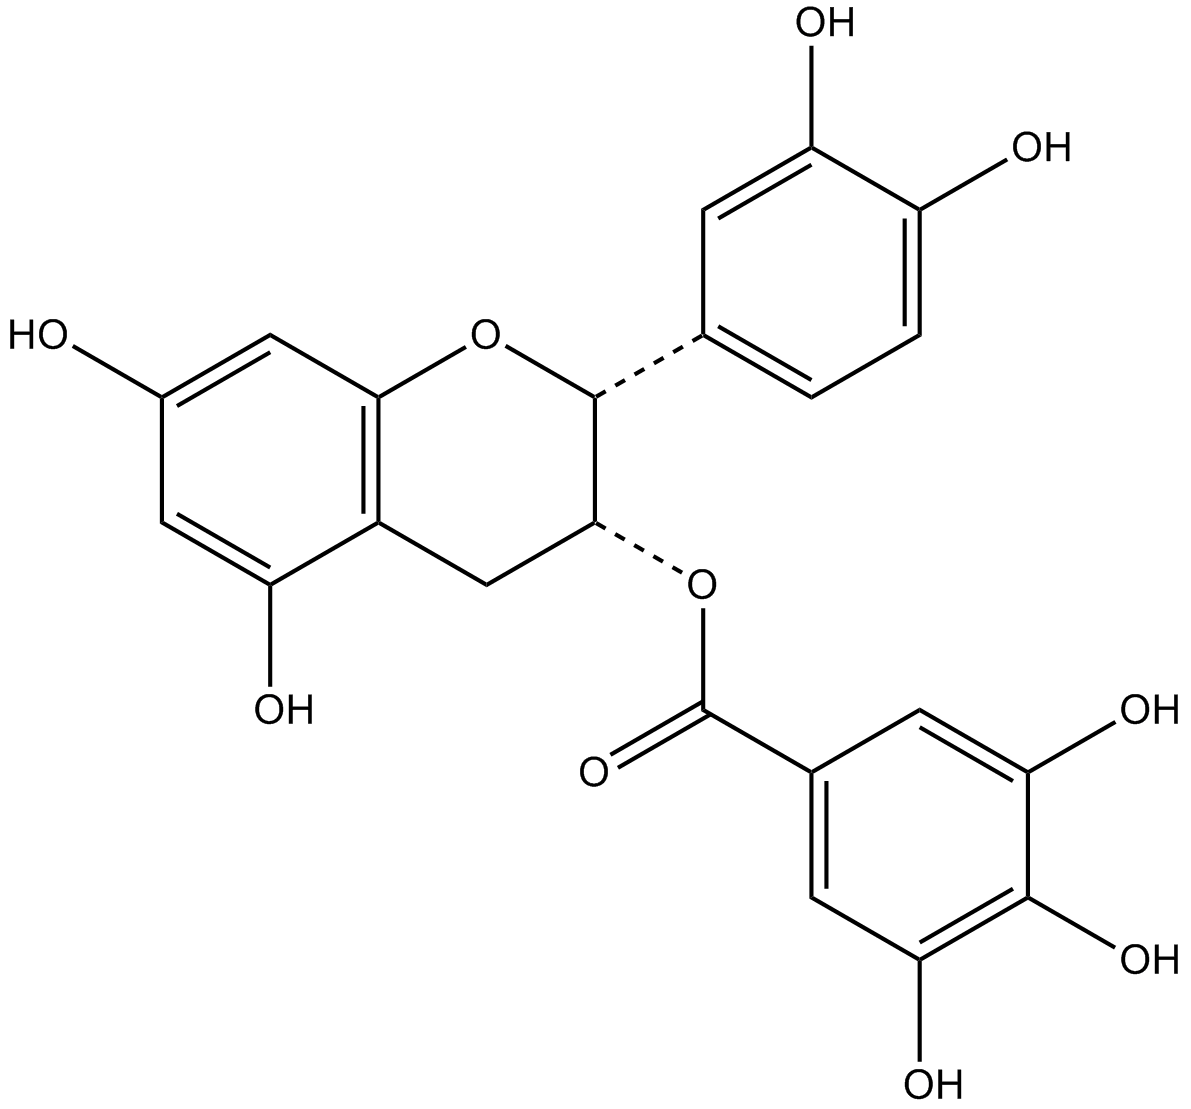 (-)-epicatechin gallate  Chemical Structure